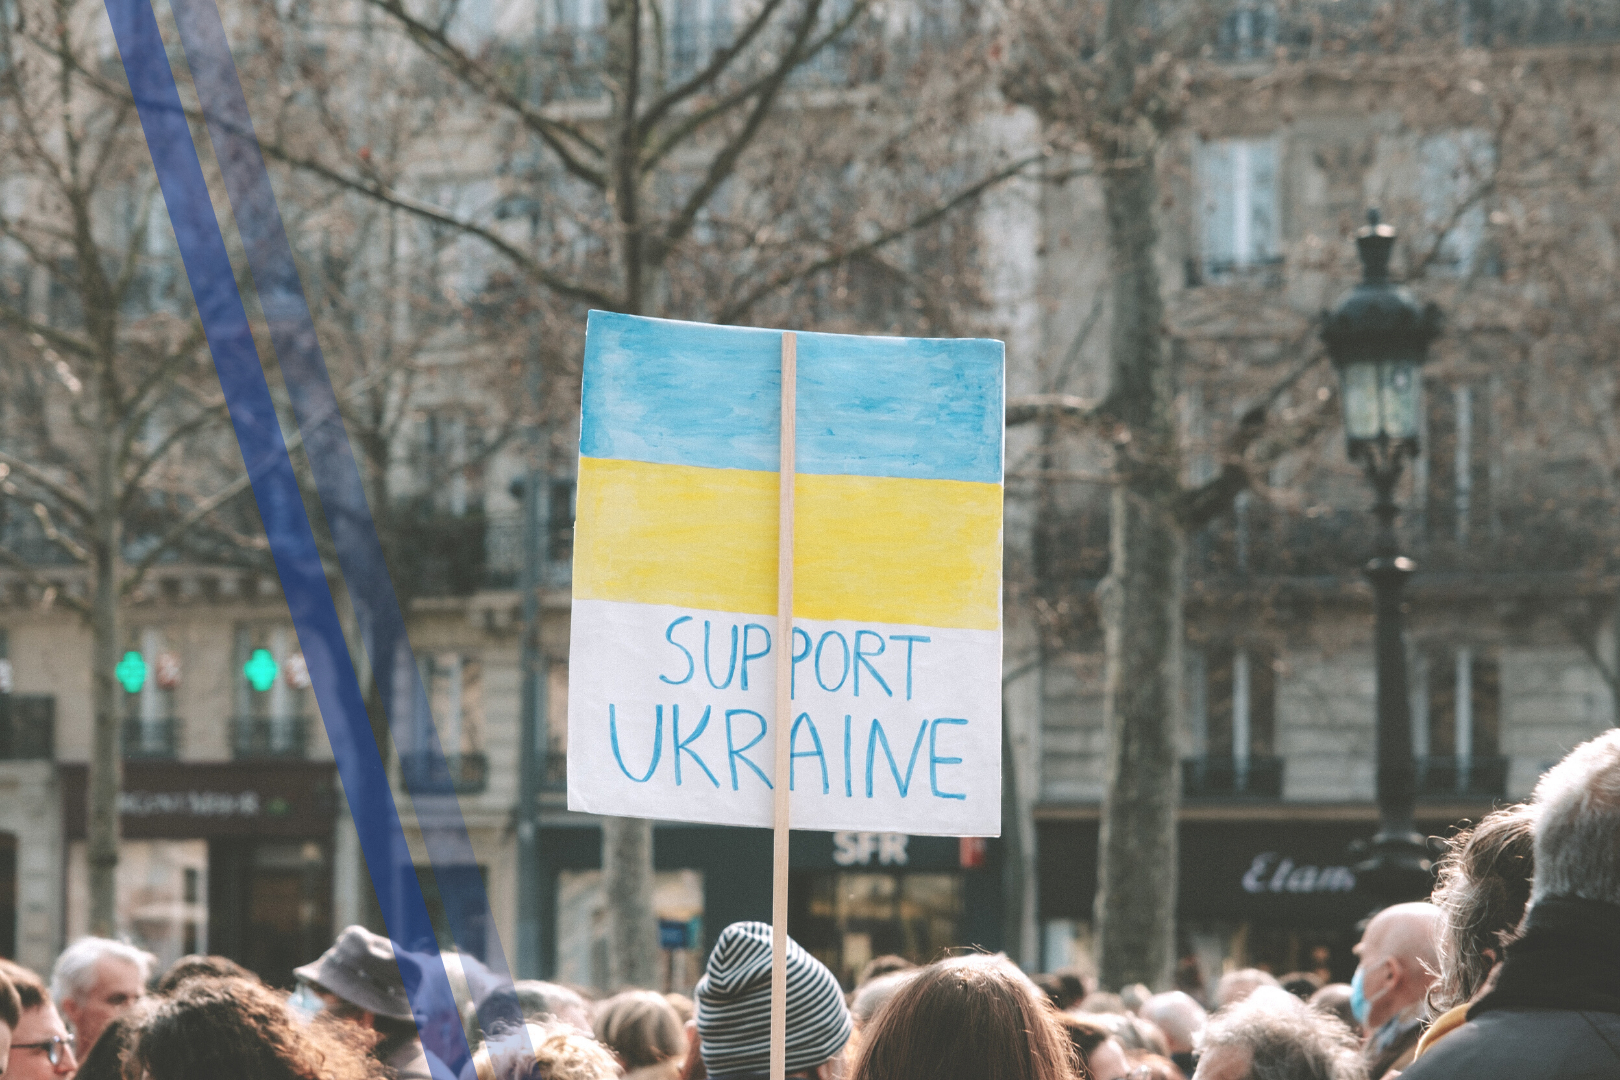 Homes for Ukraine and the DBS